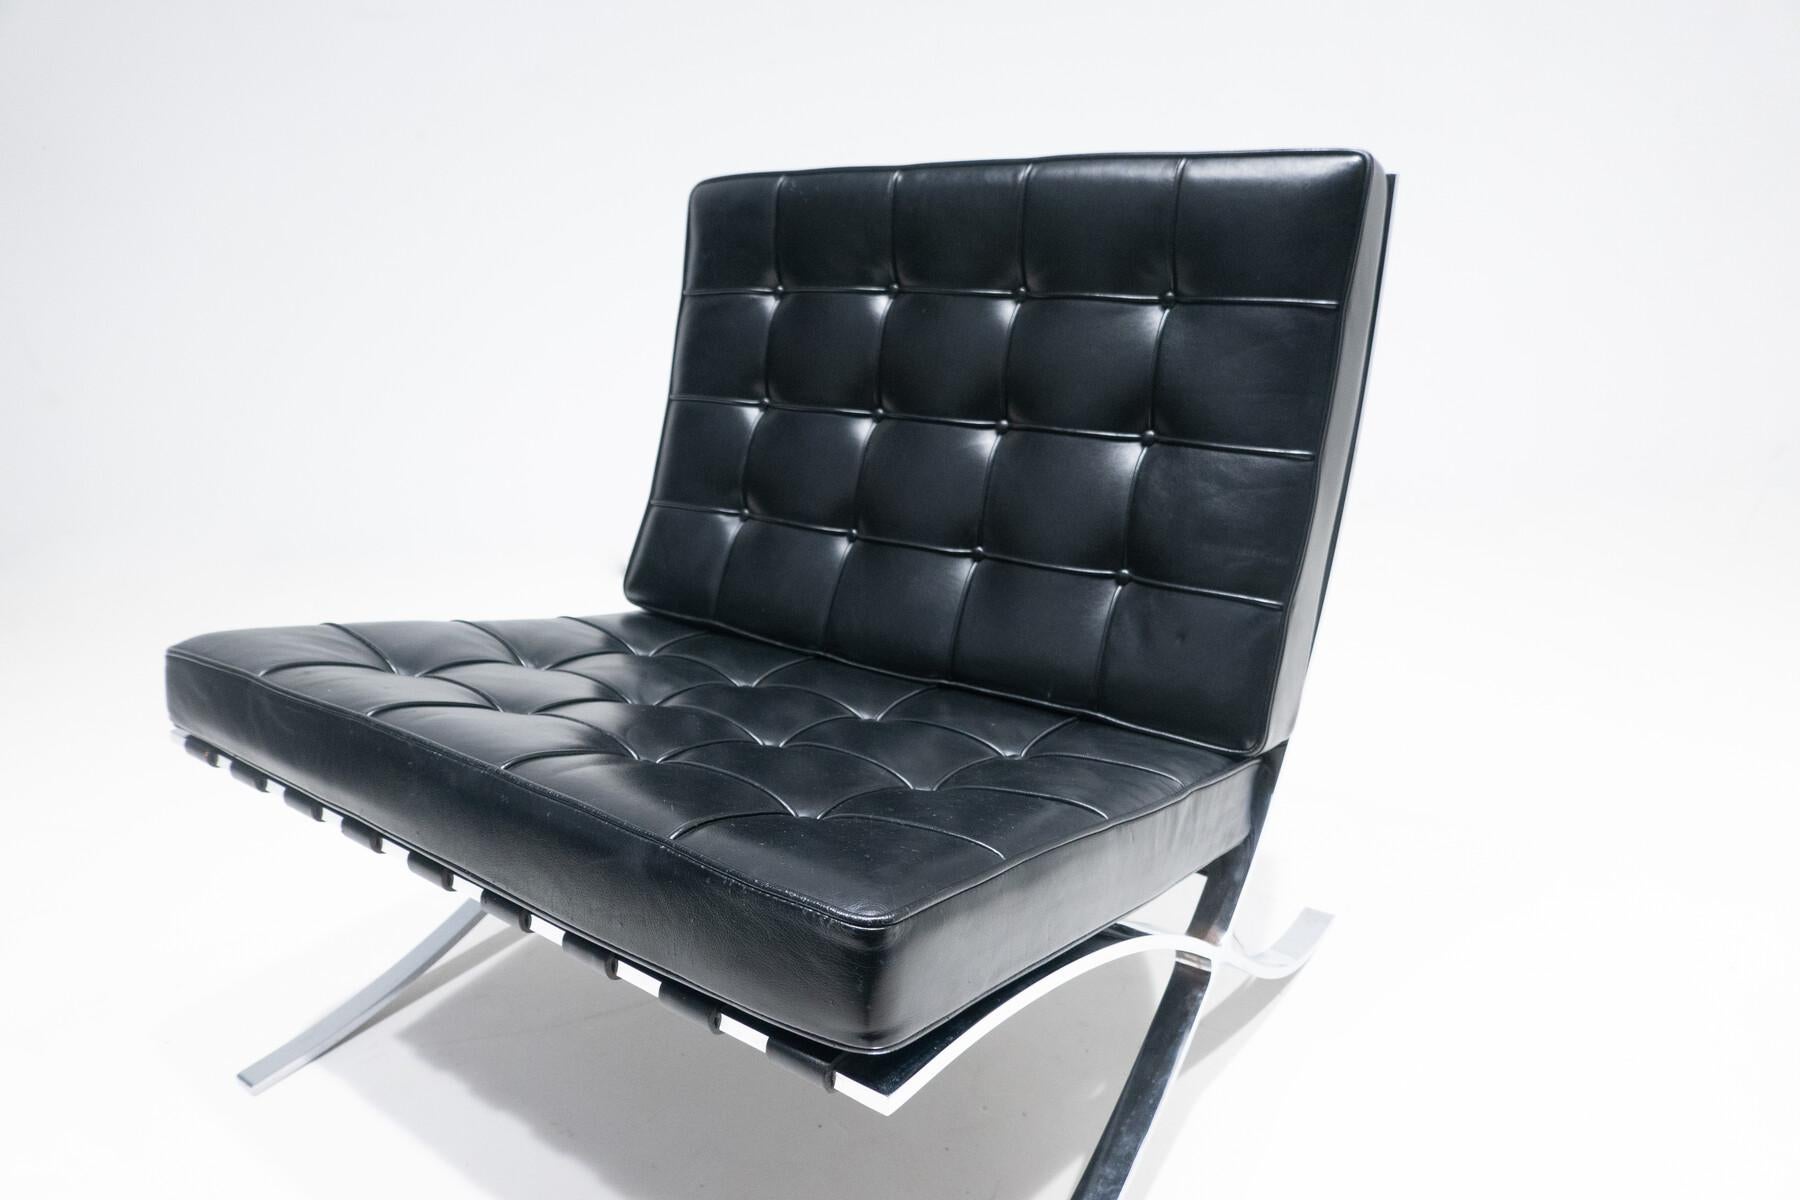 Pair of Black Leather Barcelona chairs by Mies Van Der Rohe for Knoll, 1960s.